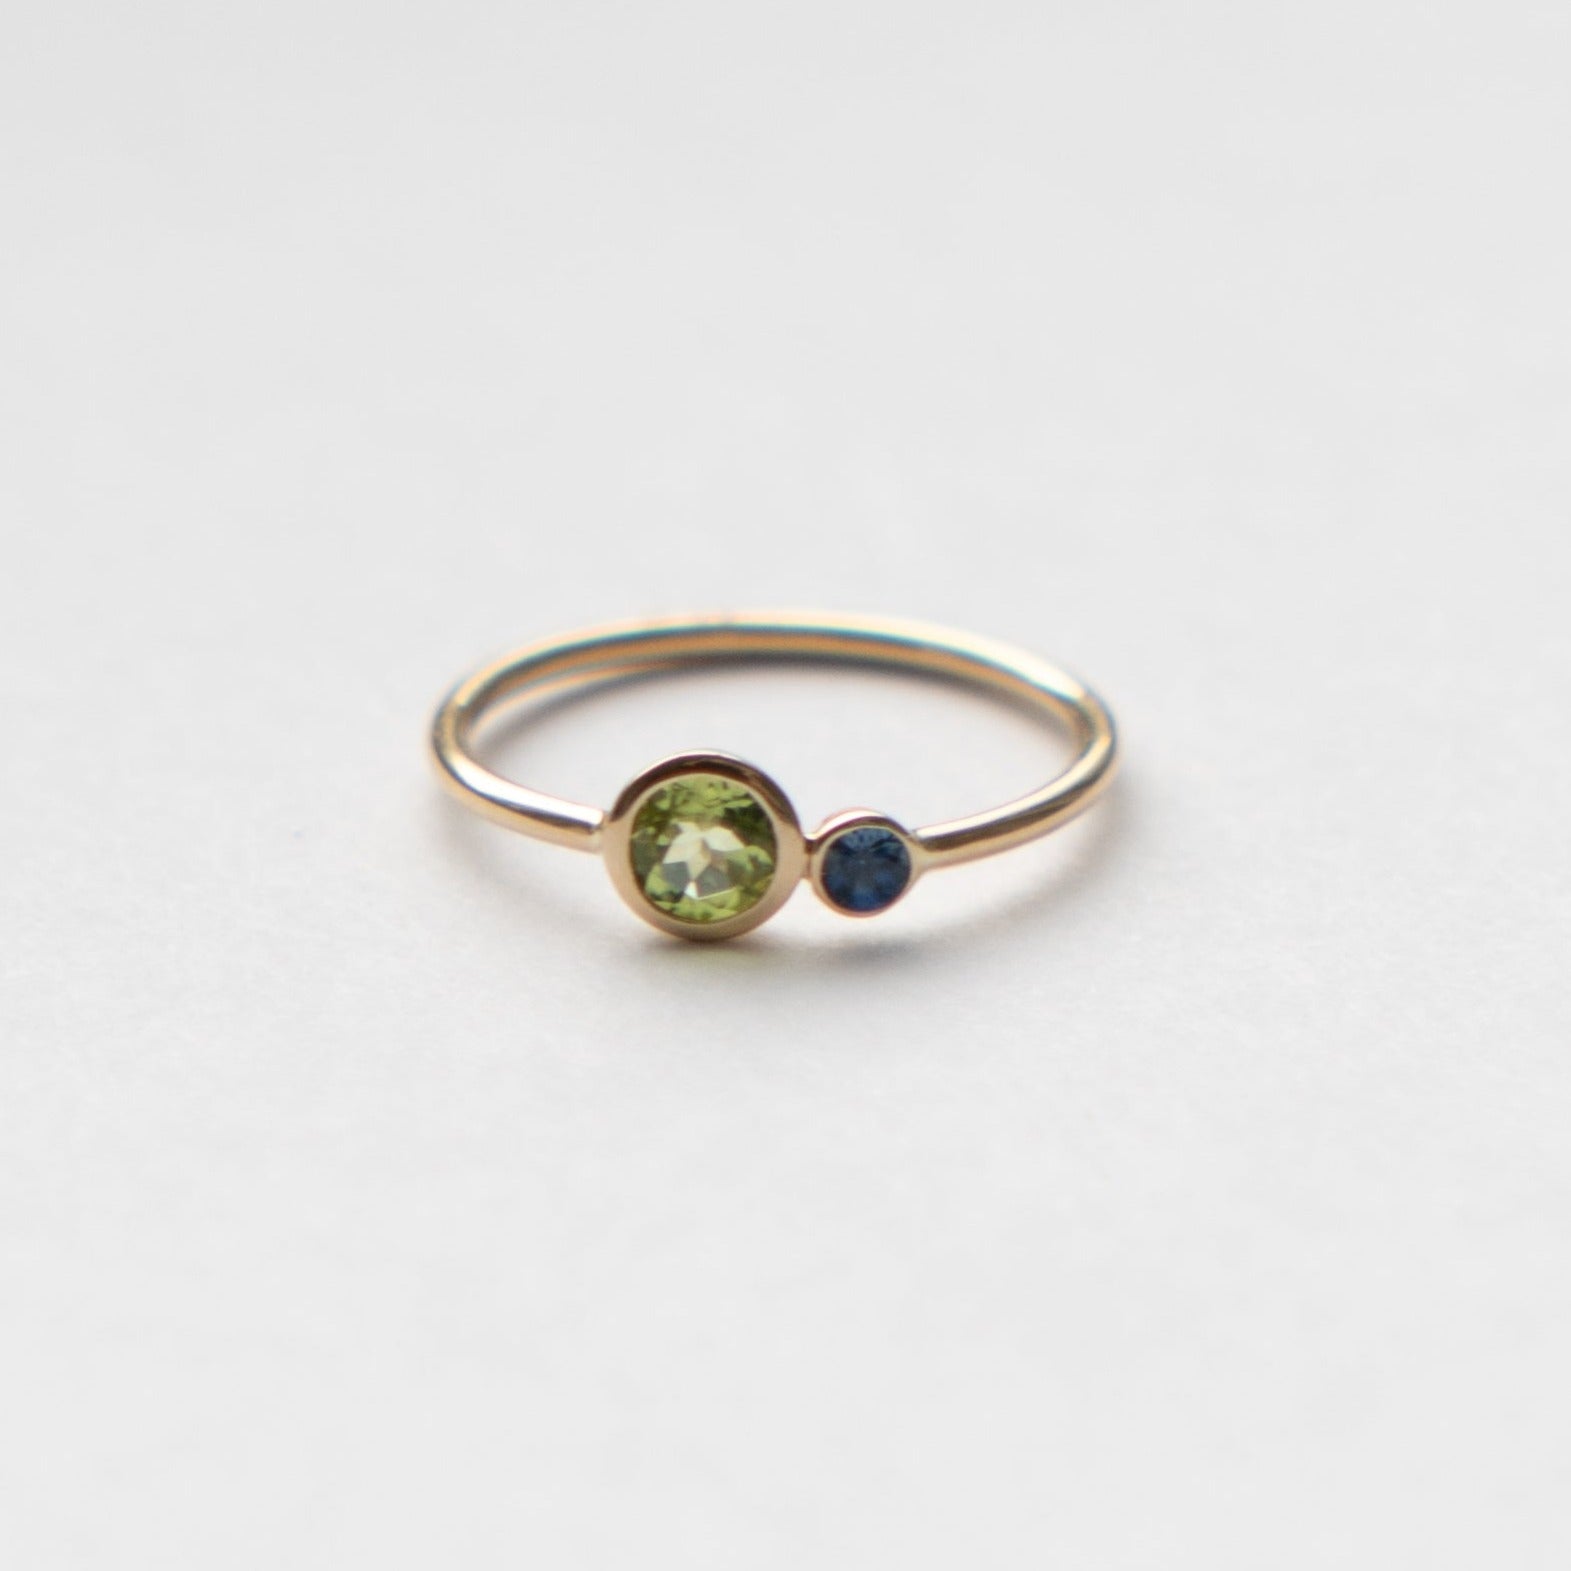 Kiki delicate ring in 14k gold set with peridot and sapphire